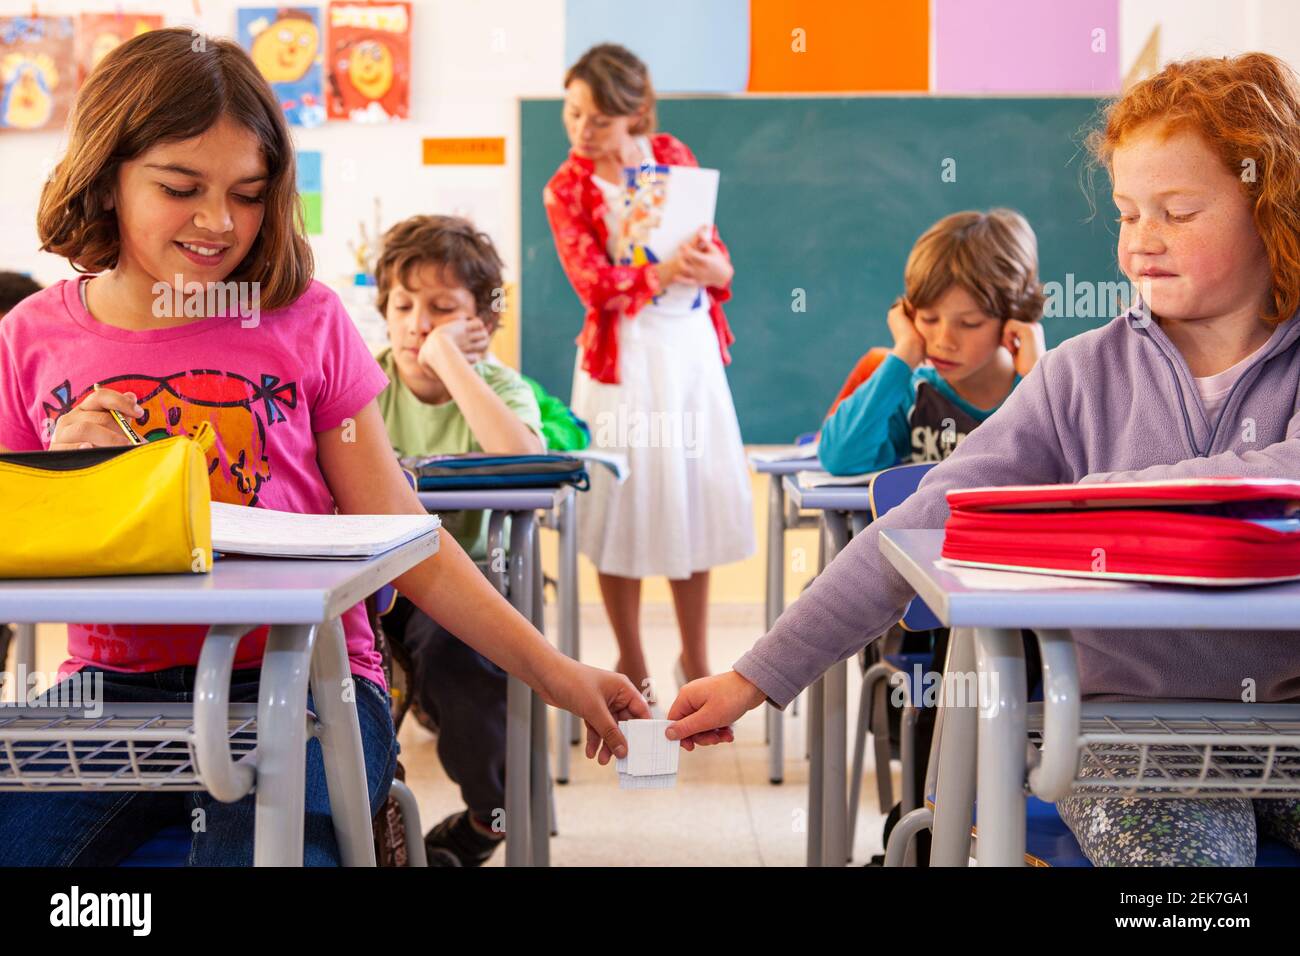 Children cheating in a school classroom Stock Photo